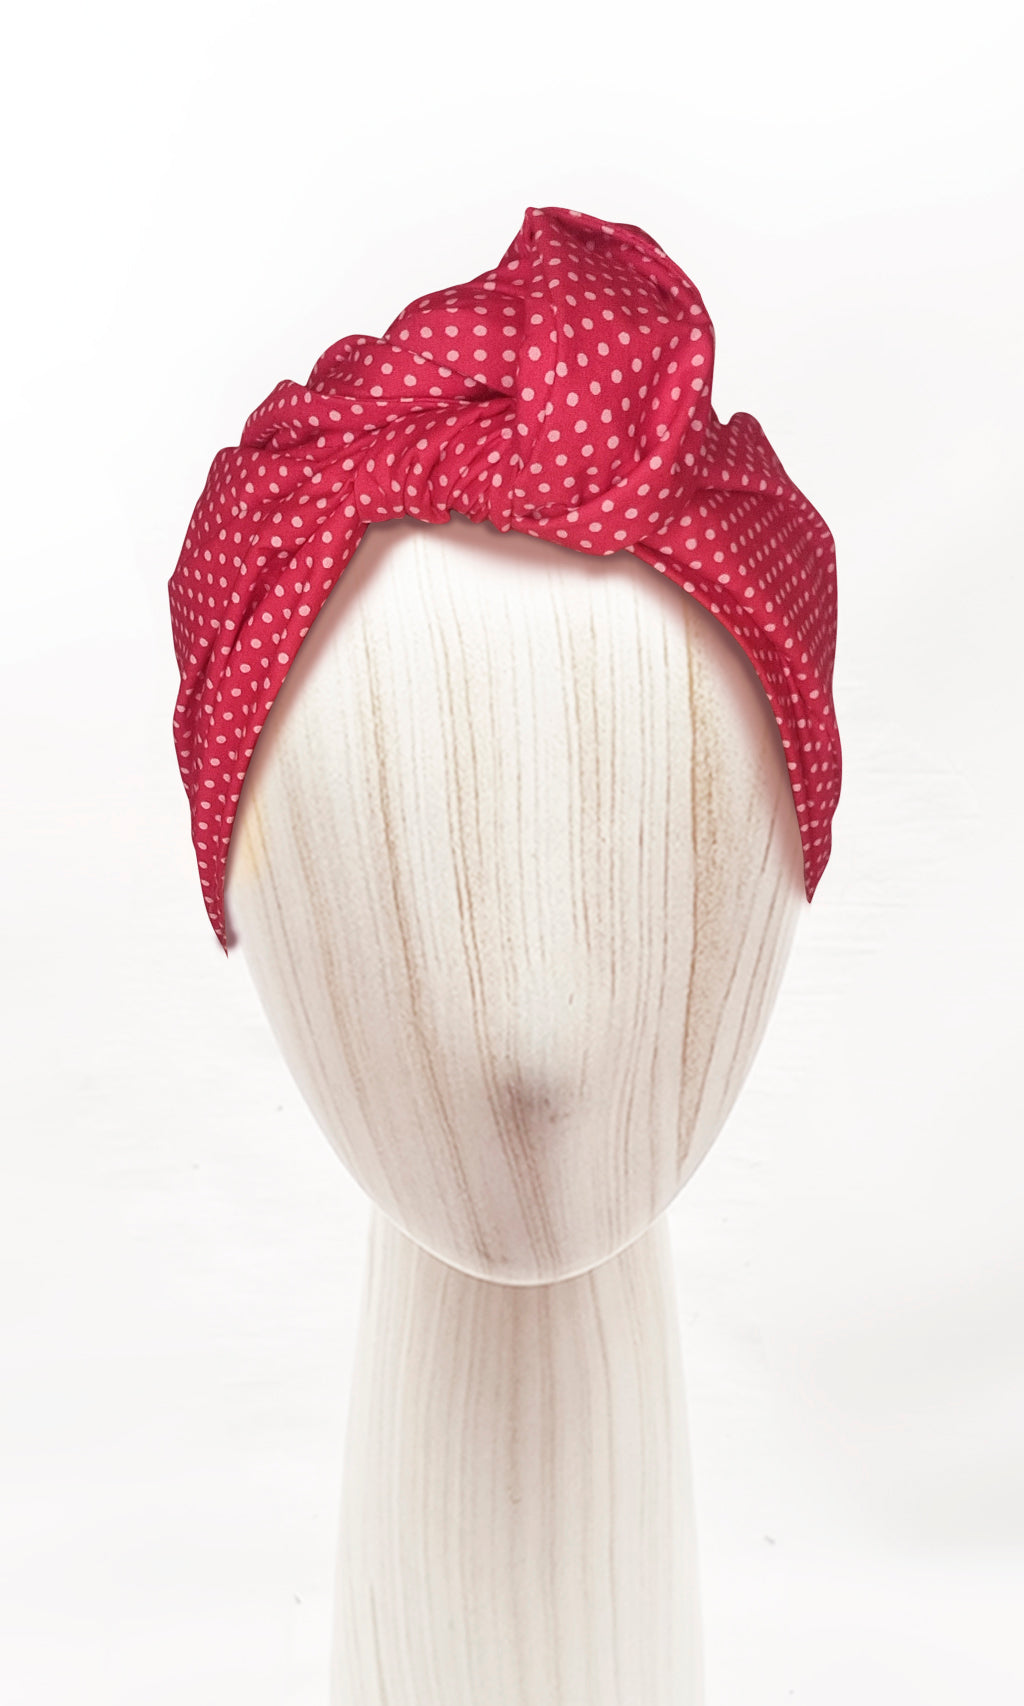 Josephine Wired Head Wrap - Red & White Polka Dots